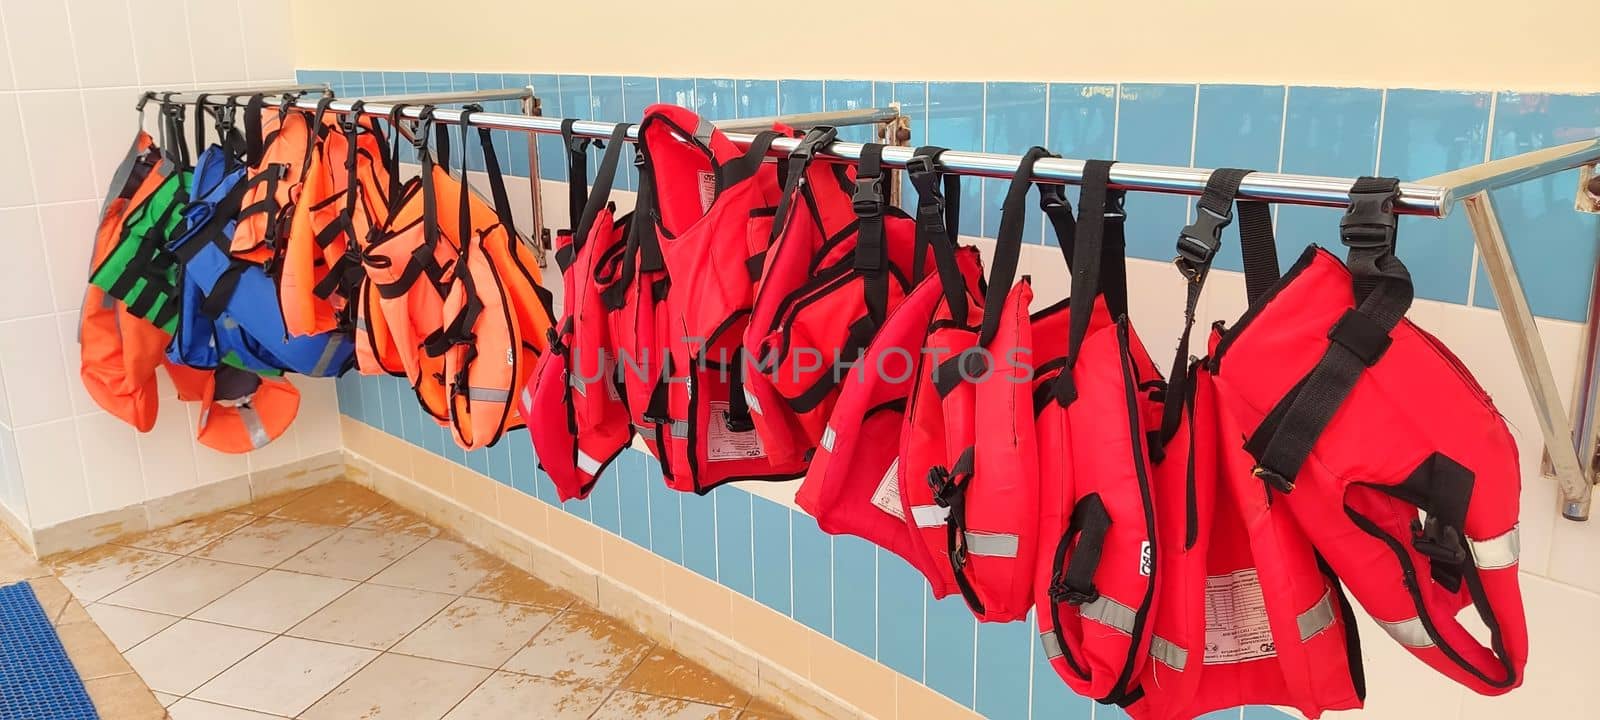 Several red and orange life jackets hang on a hanger, near the gouboi tile wall in the pool.